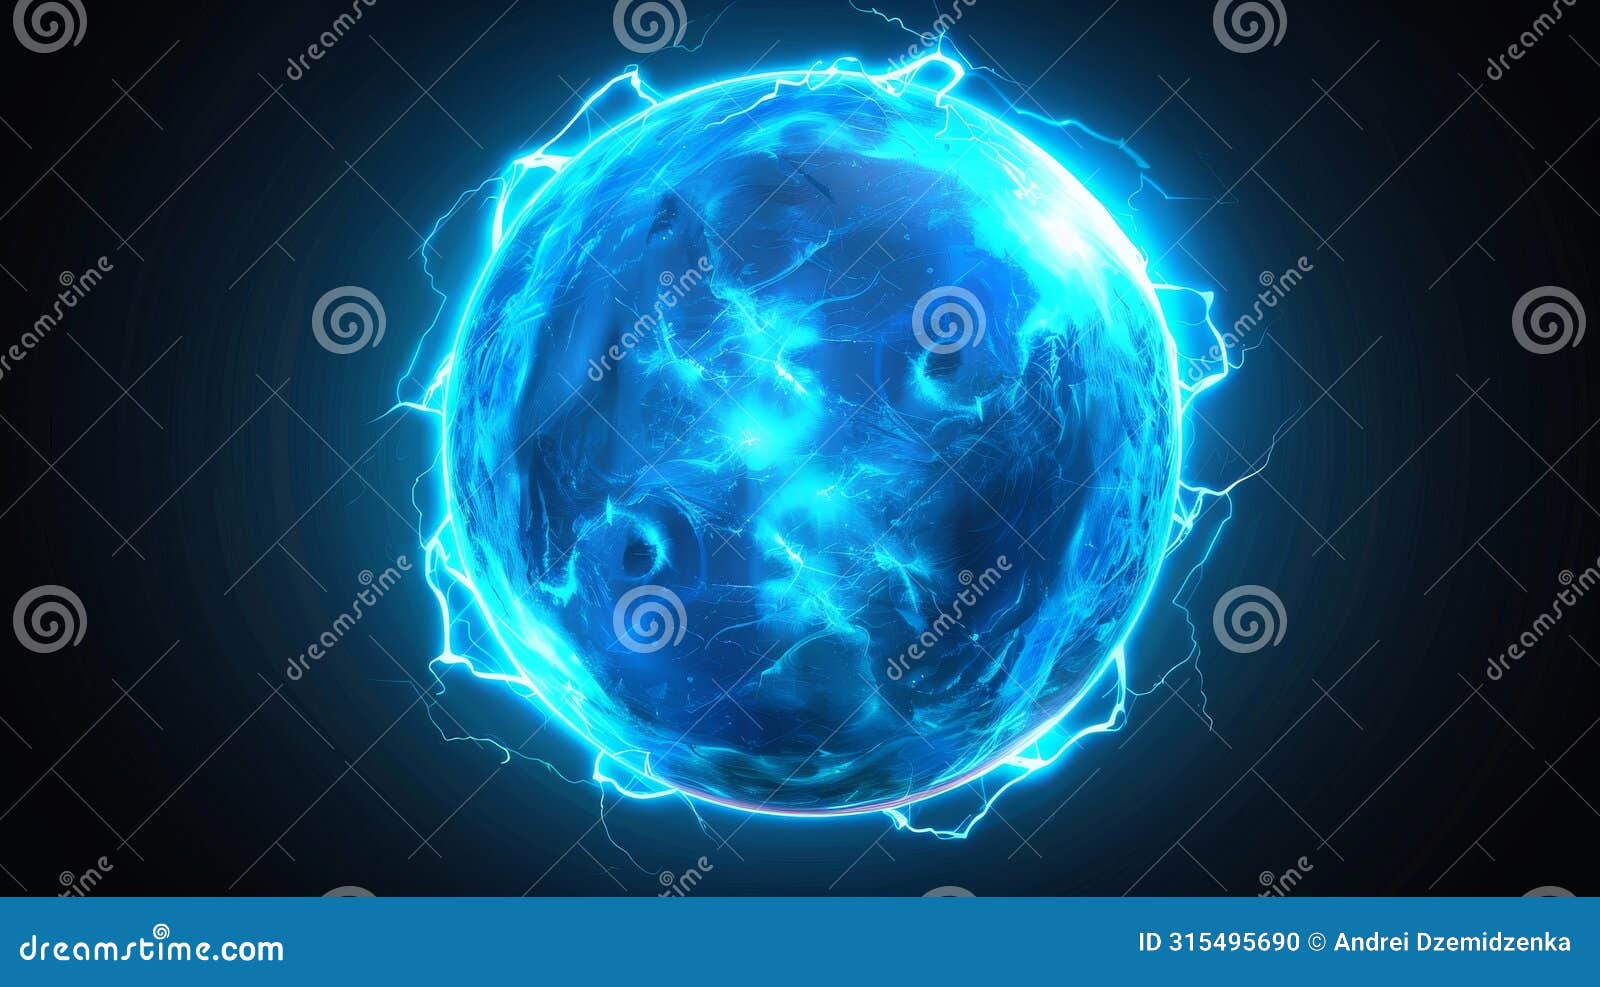  dazzle effect with electric ball with blue energy discharge, round lightning circle, plasmic sphere, realistic